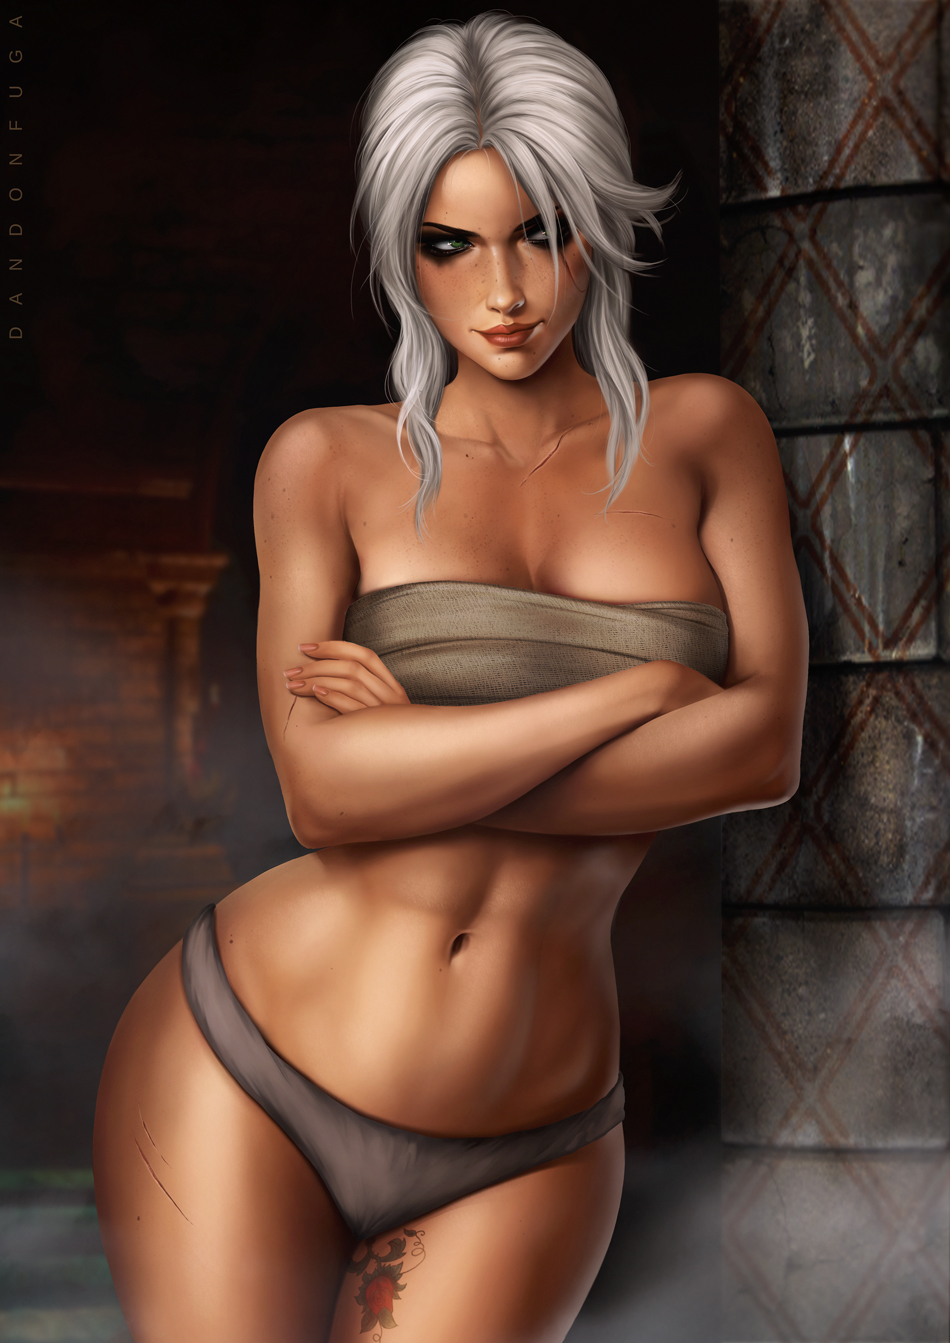 General 950x1343 Dandonfuga drawing women The Witcher Cirilla Fiona Elen Riannon silver hair looking away makeup freckles bandages panties lingerie tattoo scars sauna smiling video games video game girls fantasy art fantasy girl